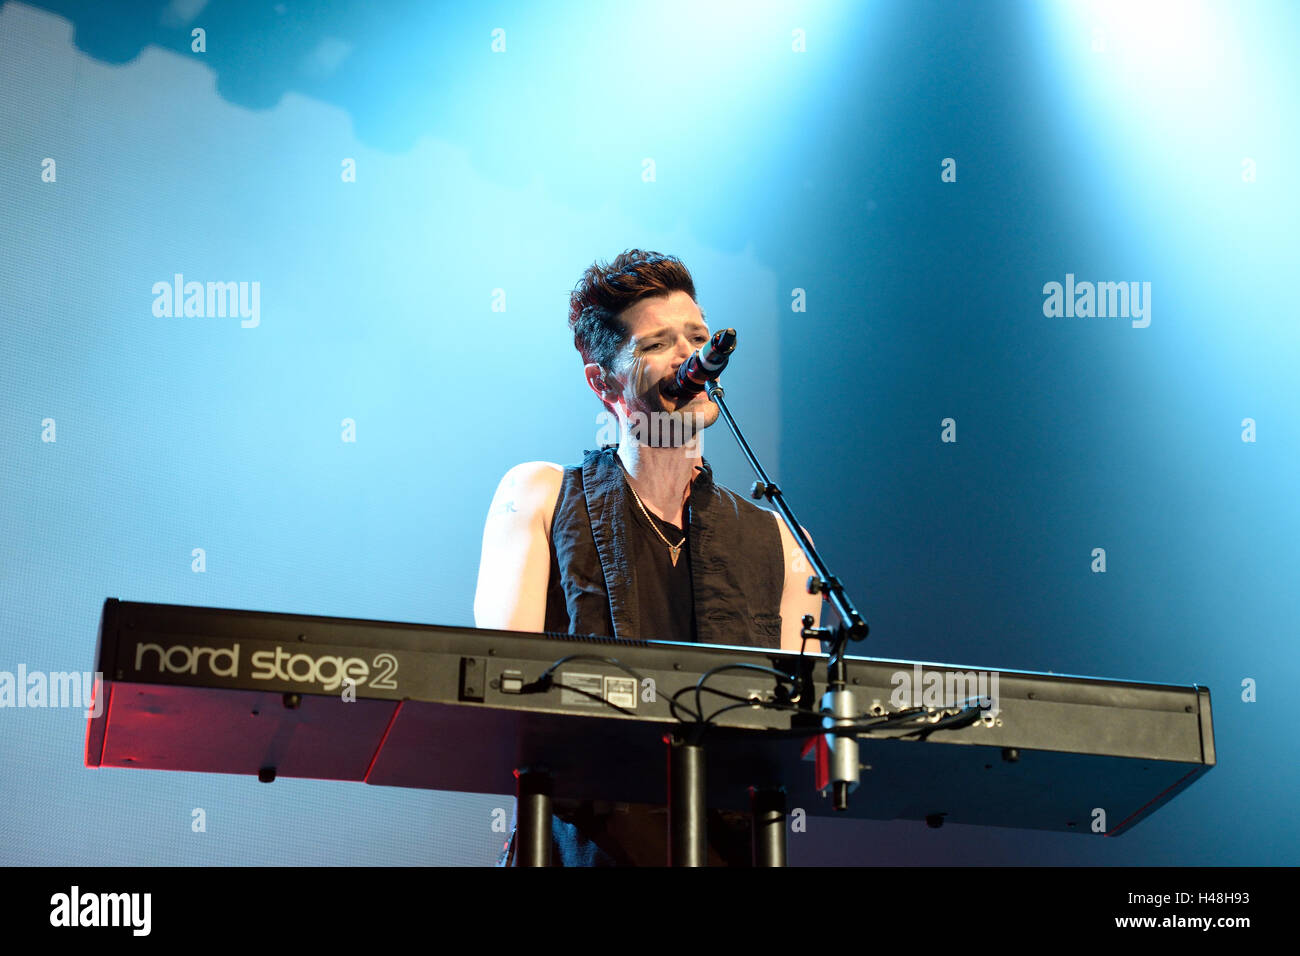 BARCELONA - MAR 30: The Script (band) performs at St. Jordi Club stage on March 30, 2015 in Barcelona, Spain. Stock Photo